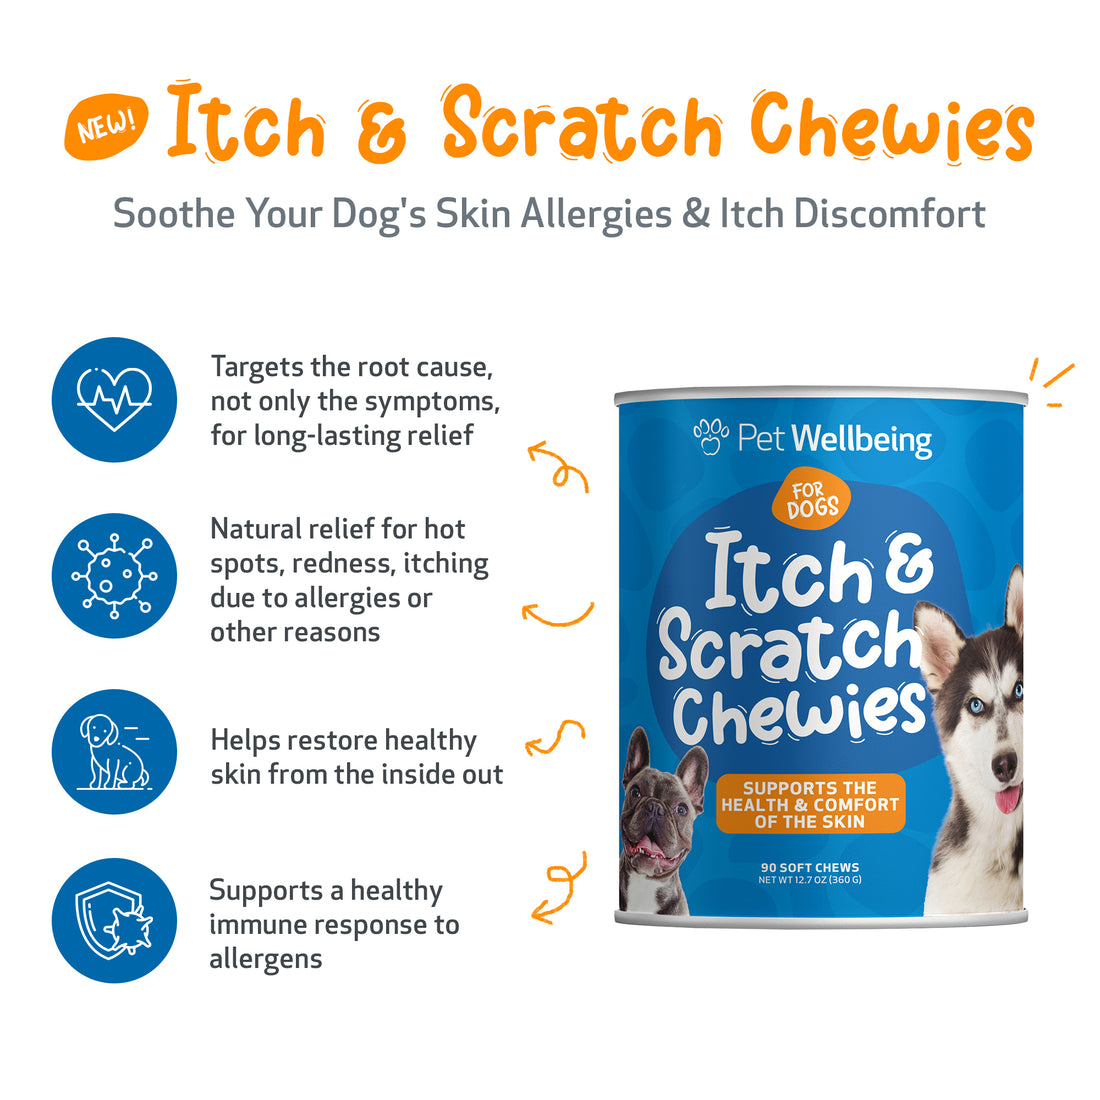 Itch & Scratch Chewies for Dogs | Pet Wellbeing